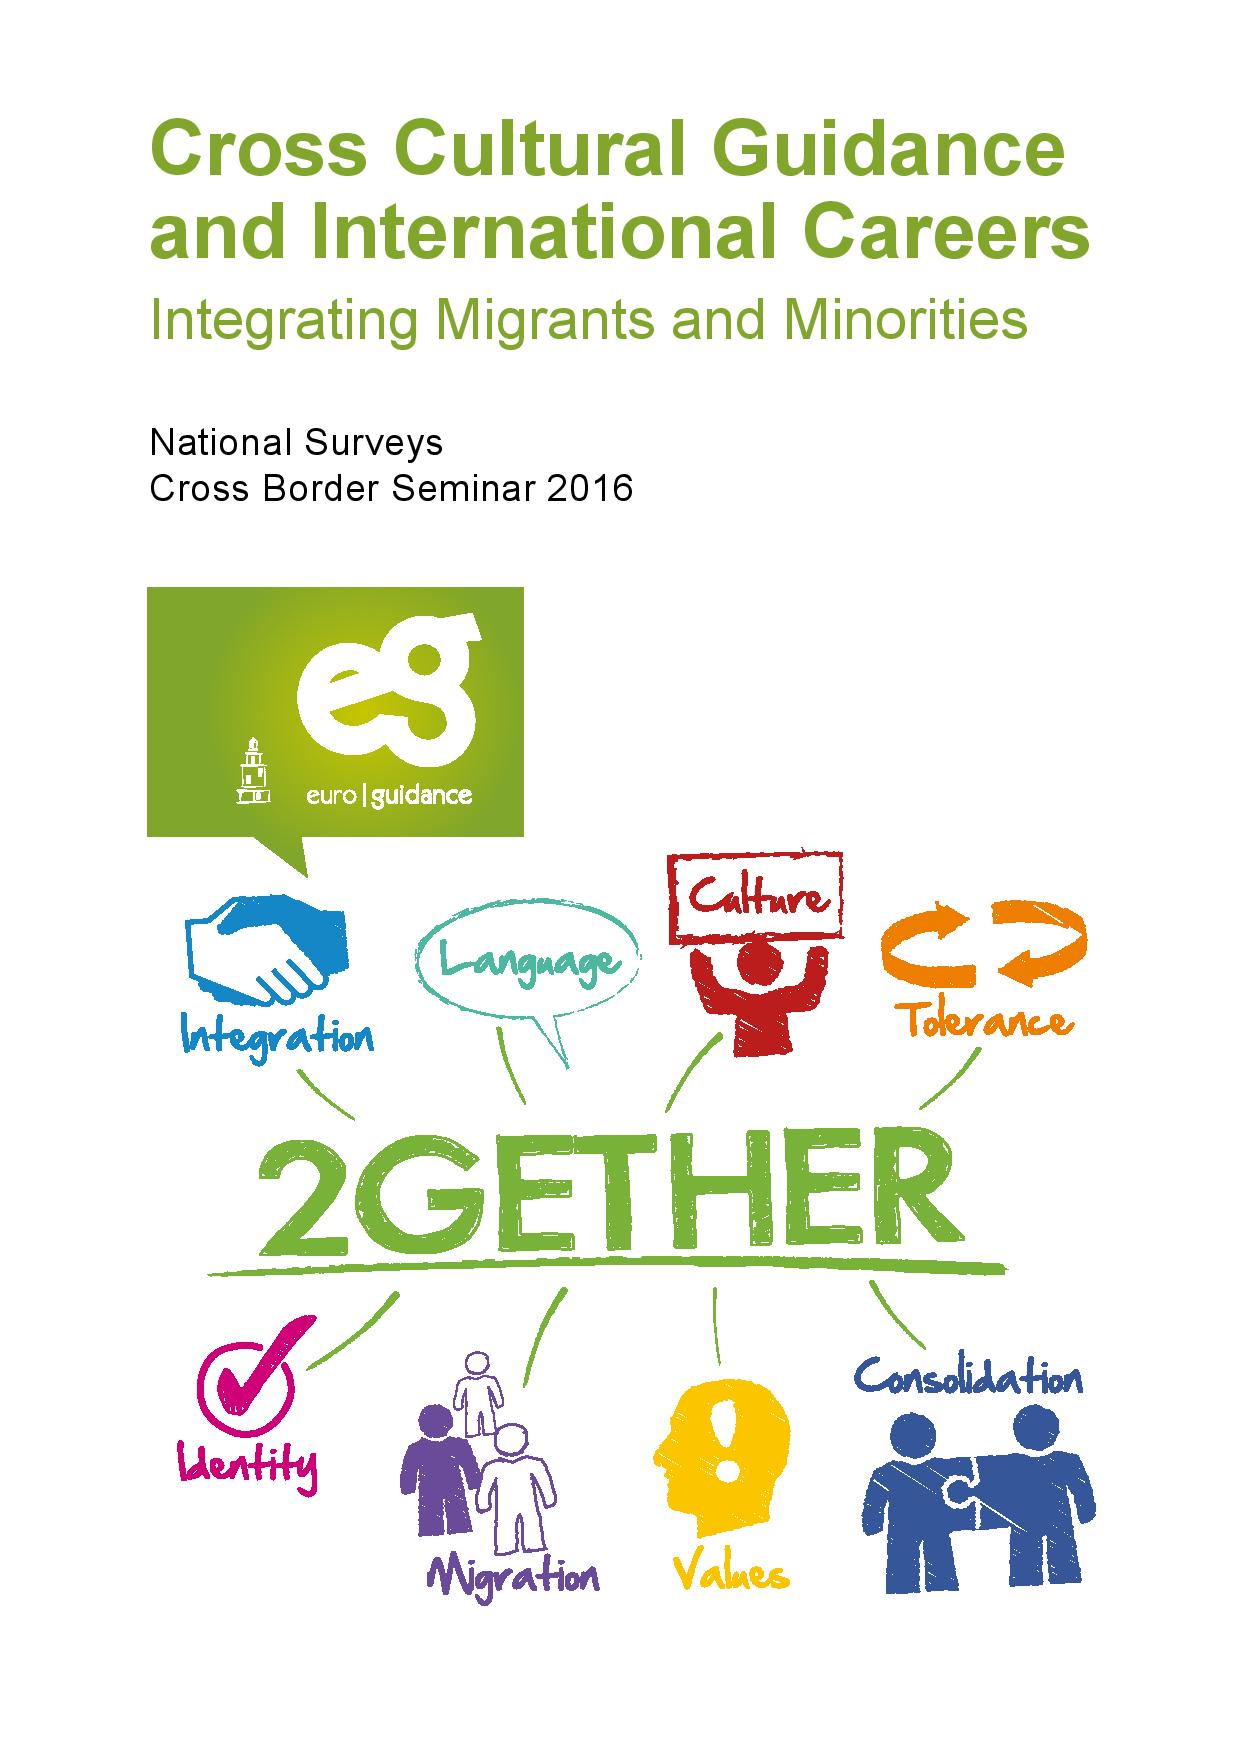 Cross Cultural Guidance and International Careers - Integrating Migrants and Minorities